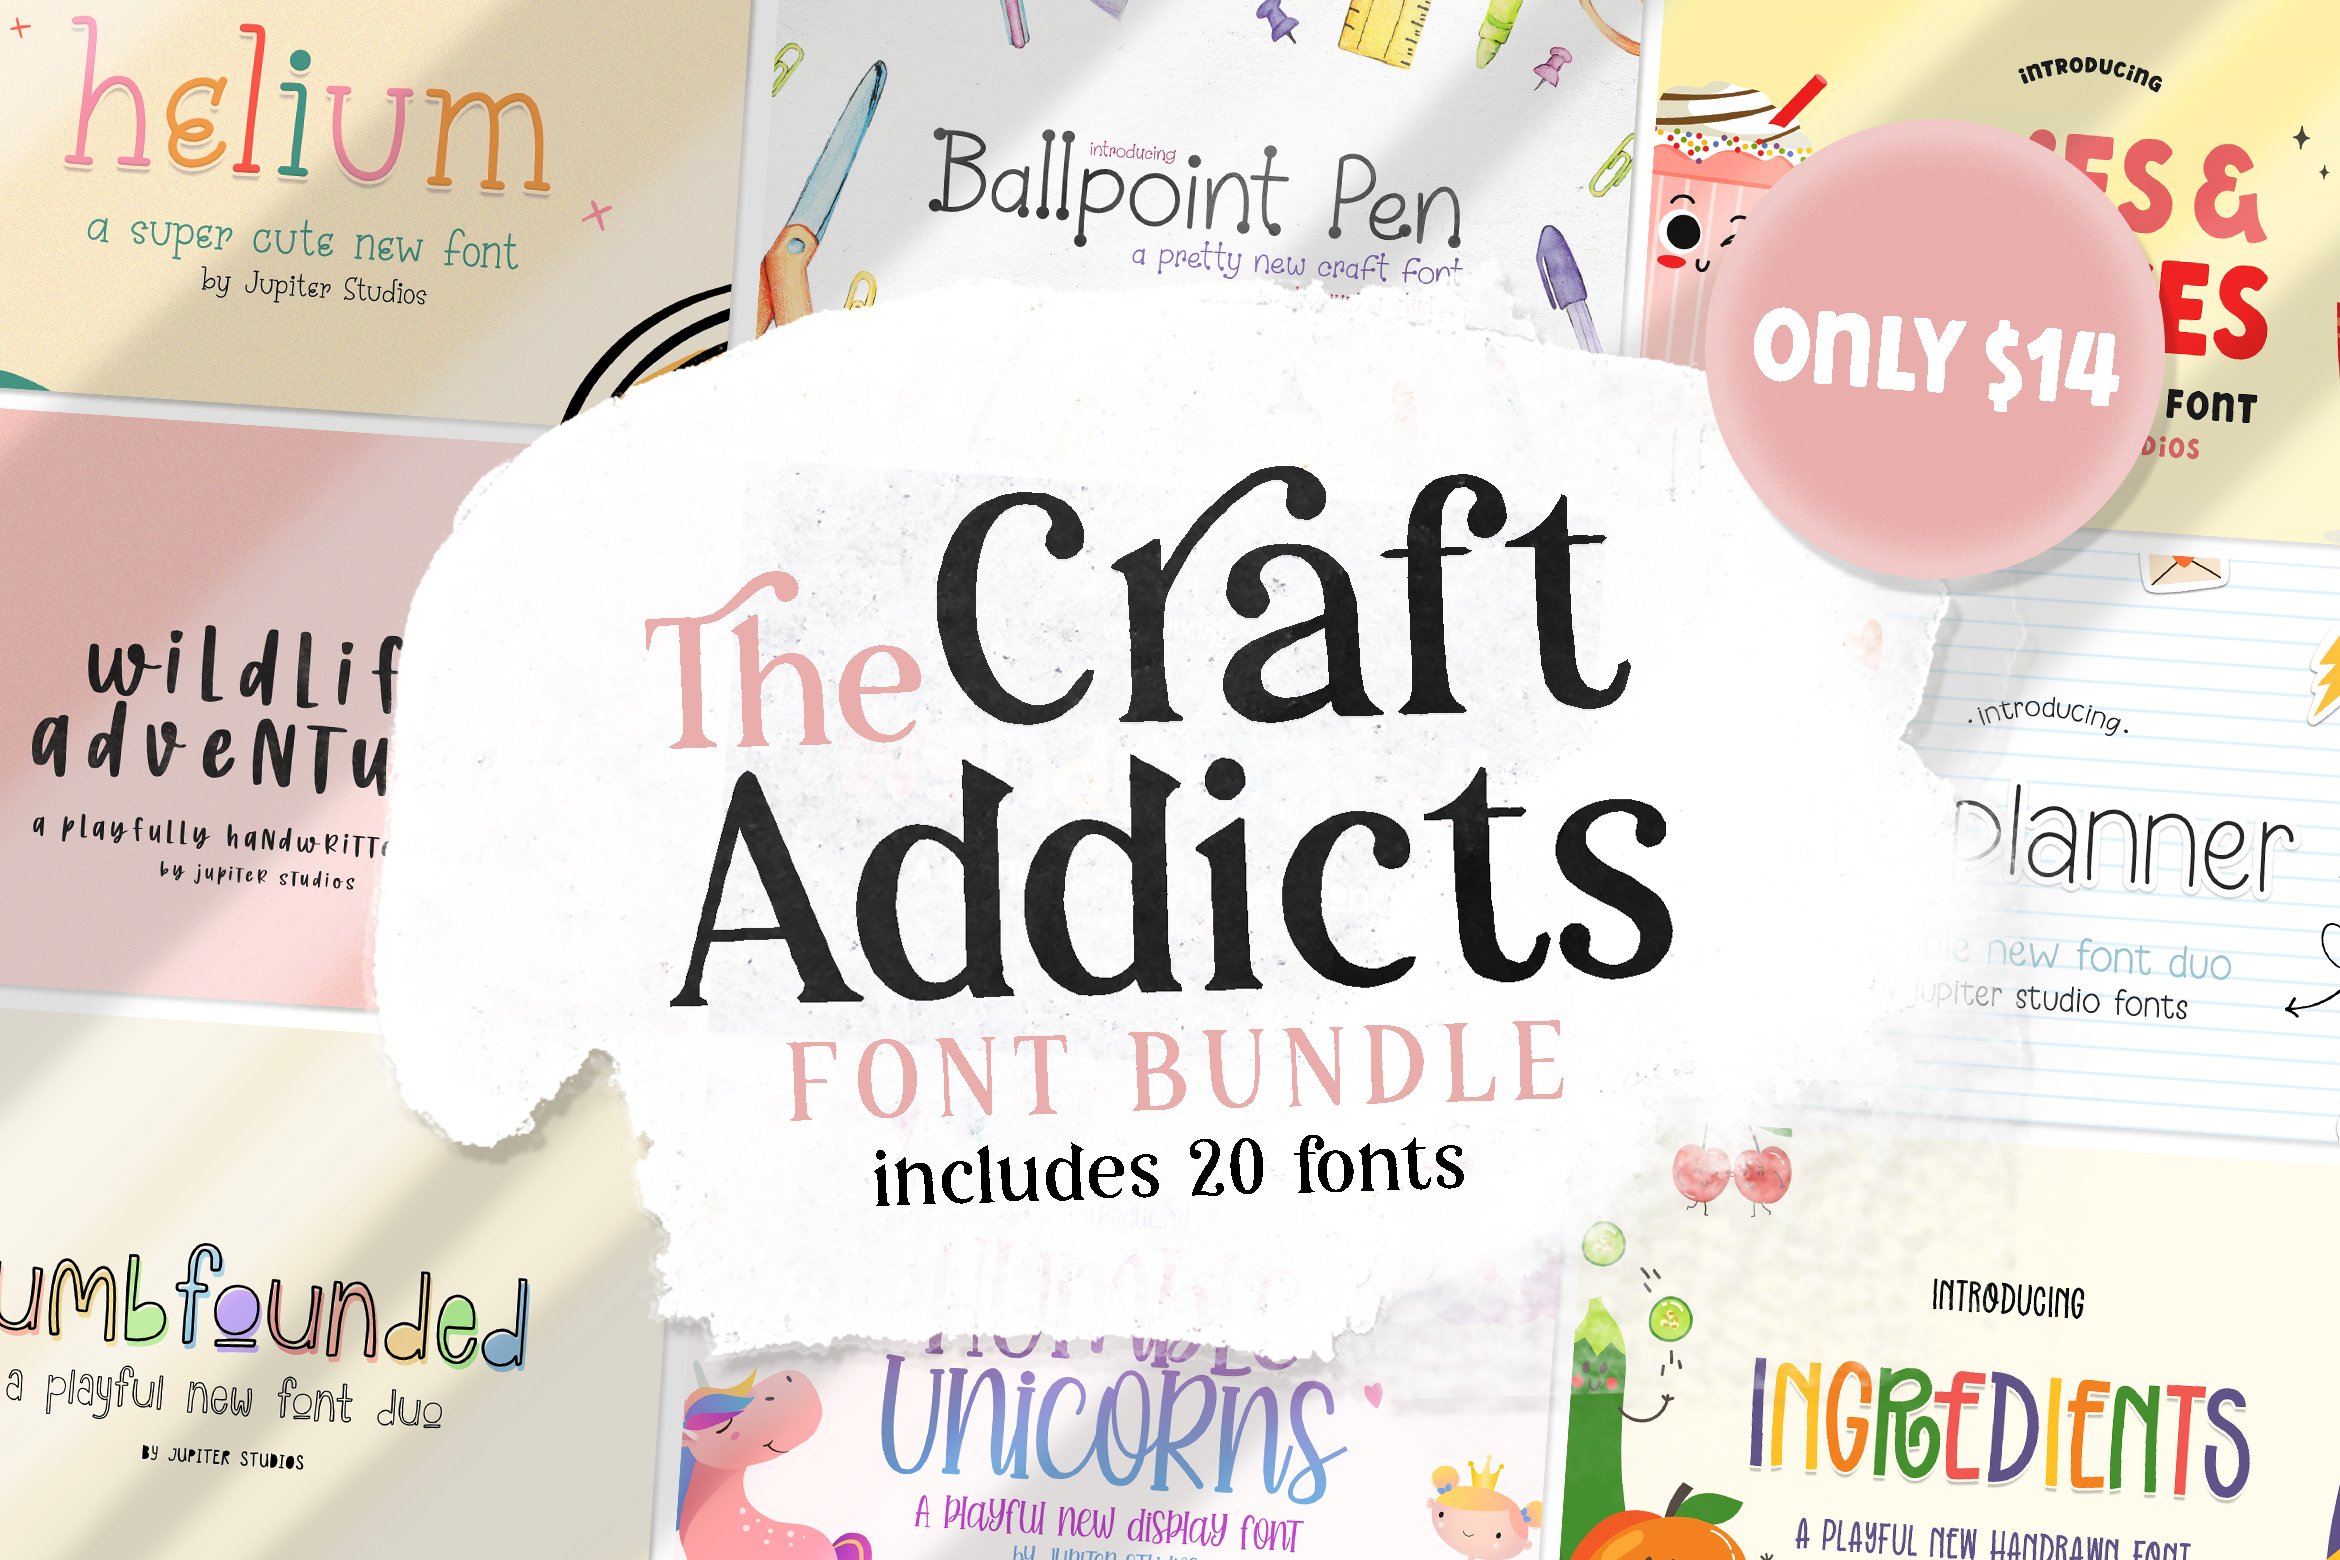 The Craft Addicts Font Bundle cover image.